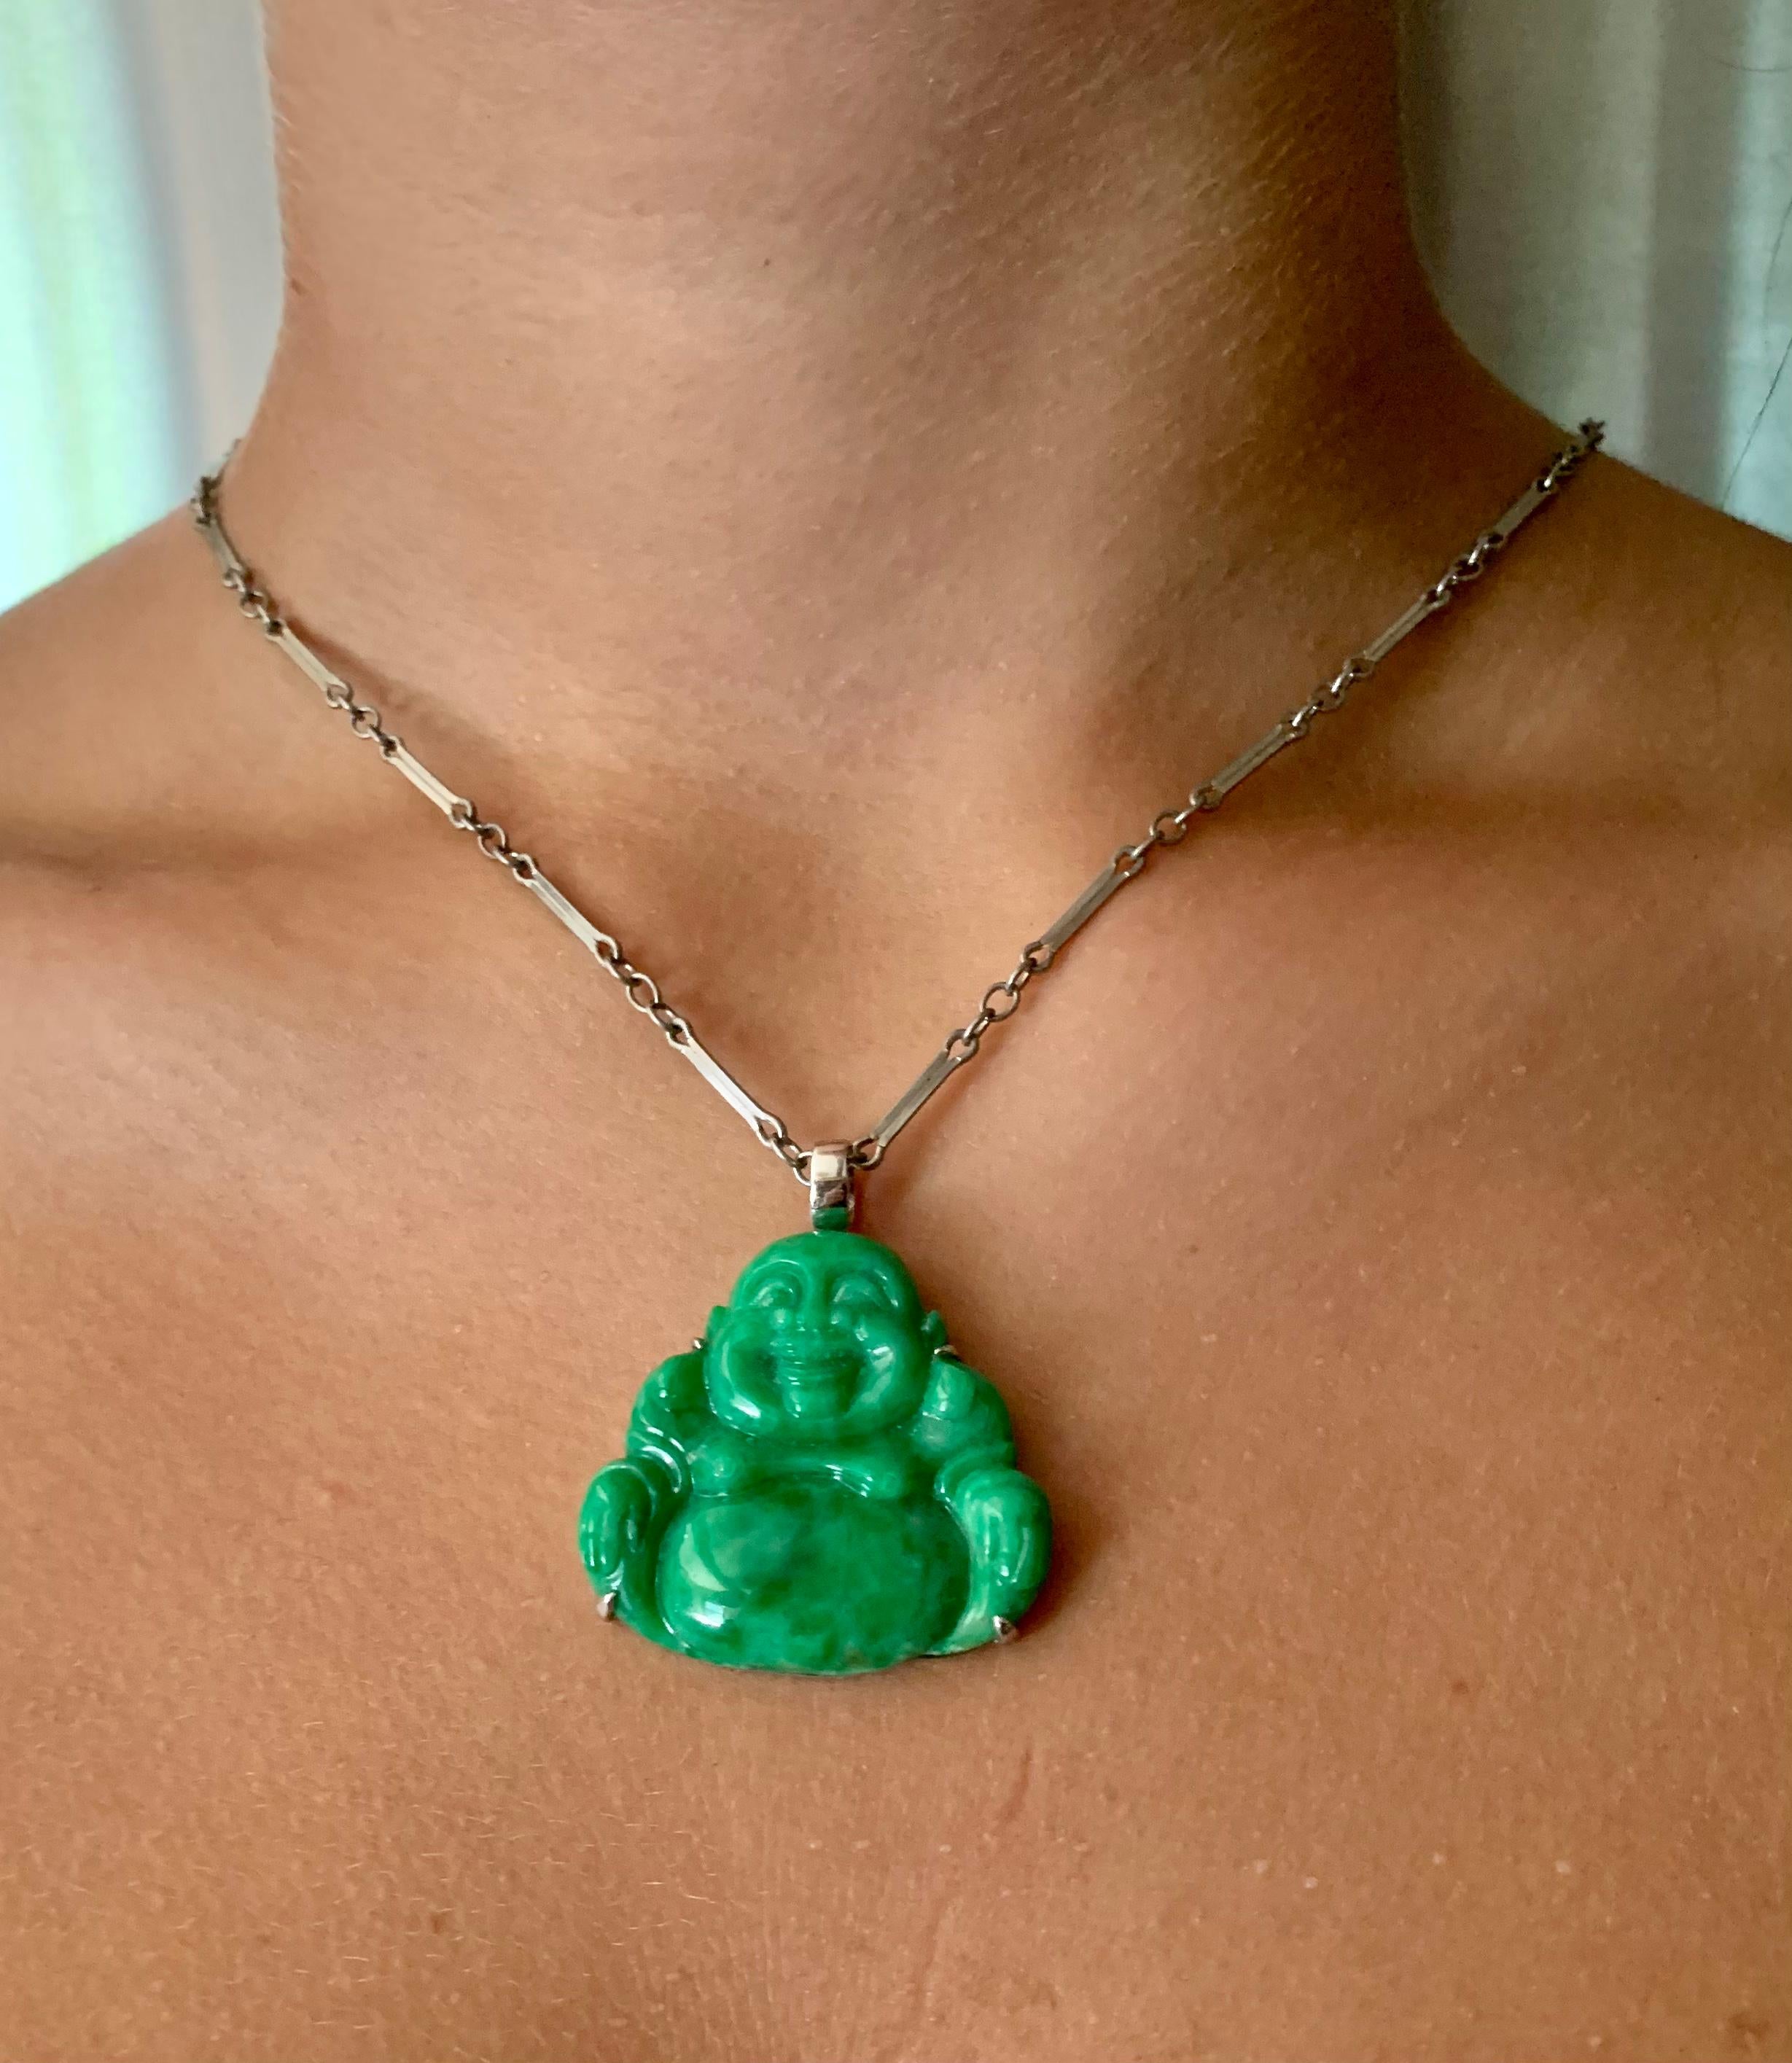 Fine large Apple Green carved jade Laughing Buddha pendant set in 18K white gold.
Hong Kong Gems Laboratory certificate GL100040 certifying that this pendant is a natural color Fei Cui Type A jade weighing 43.51 carats.
Attributed to David C.A. Lin,